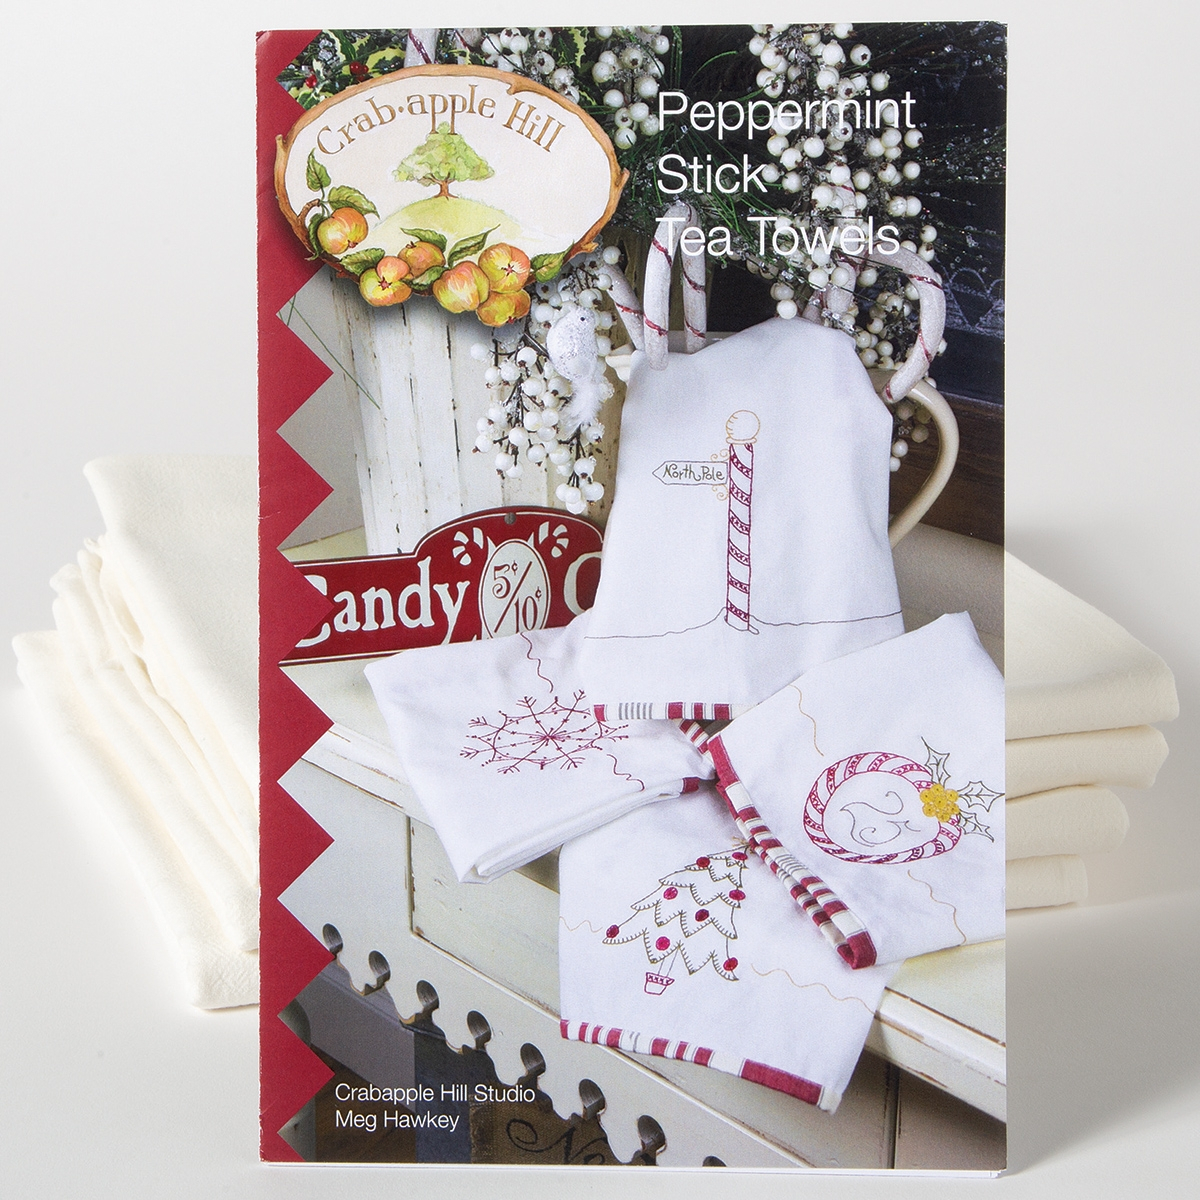 English Embroidery Patterns Embroidery Books Patterns Embroidery